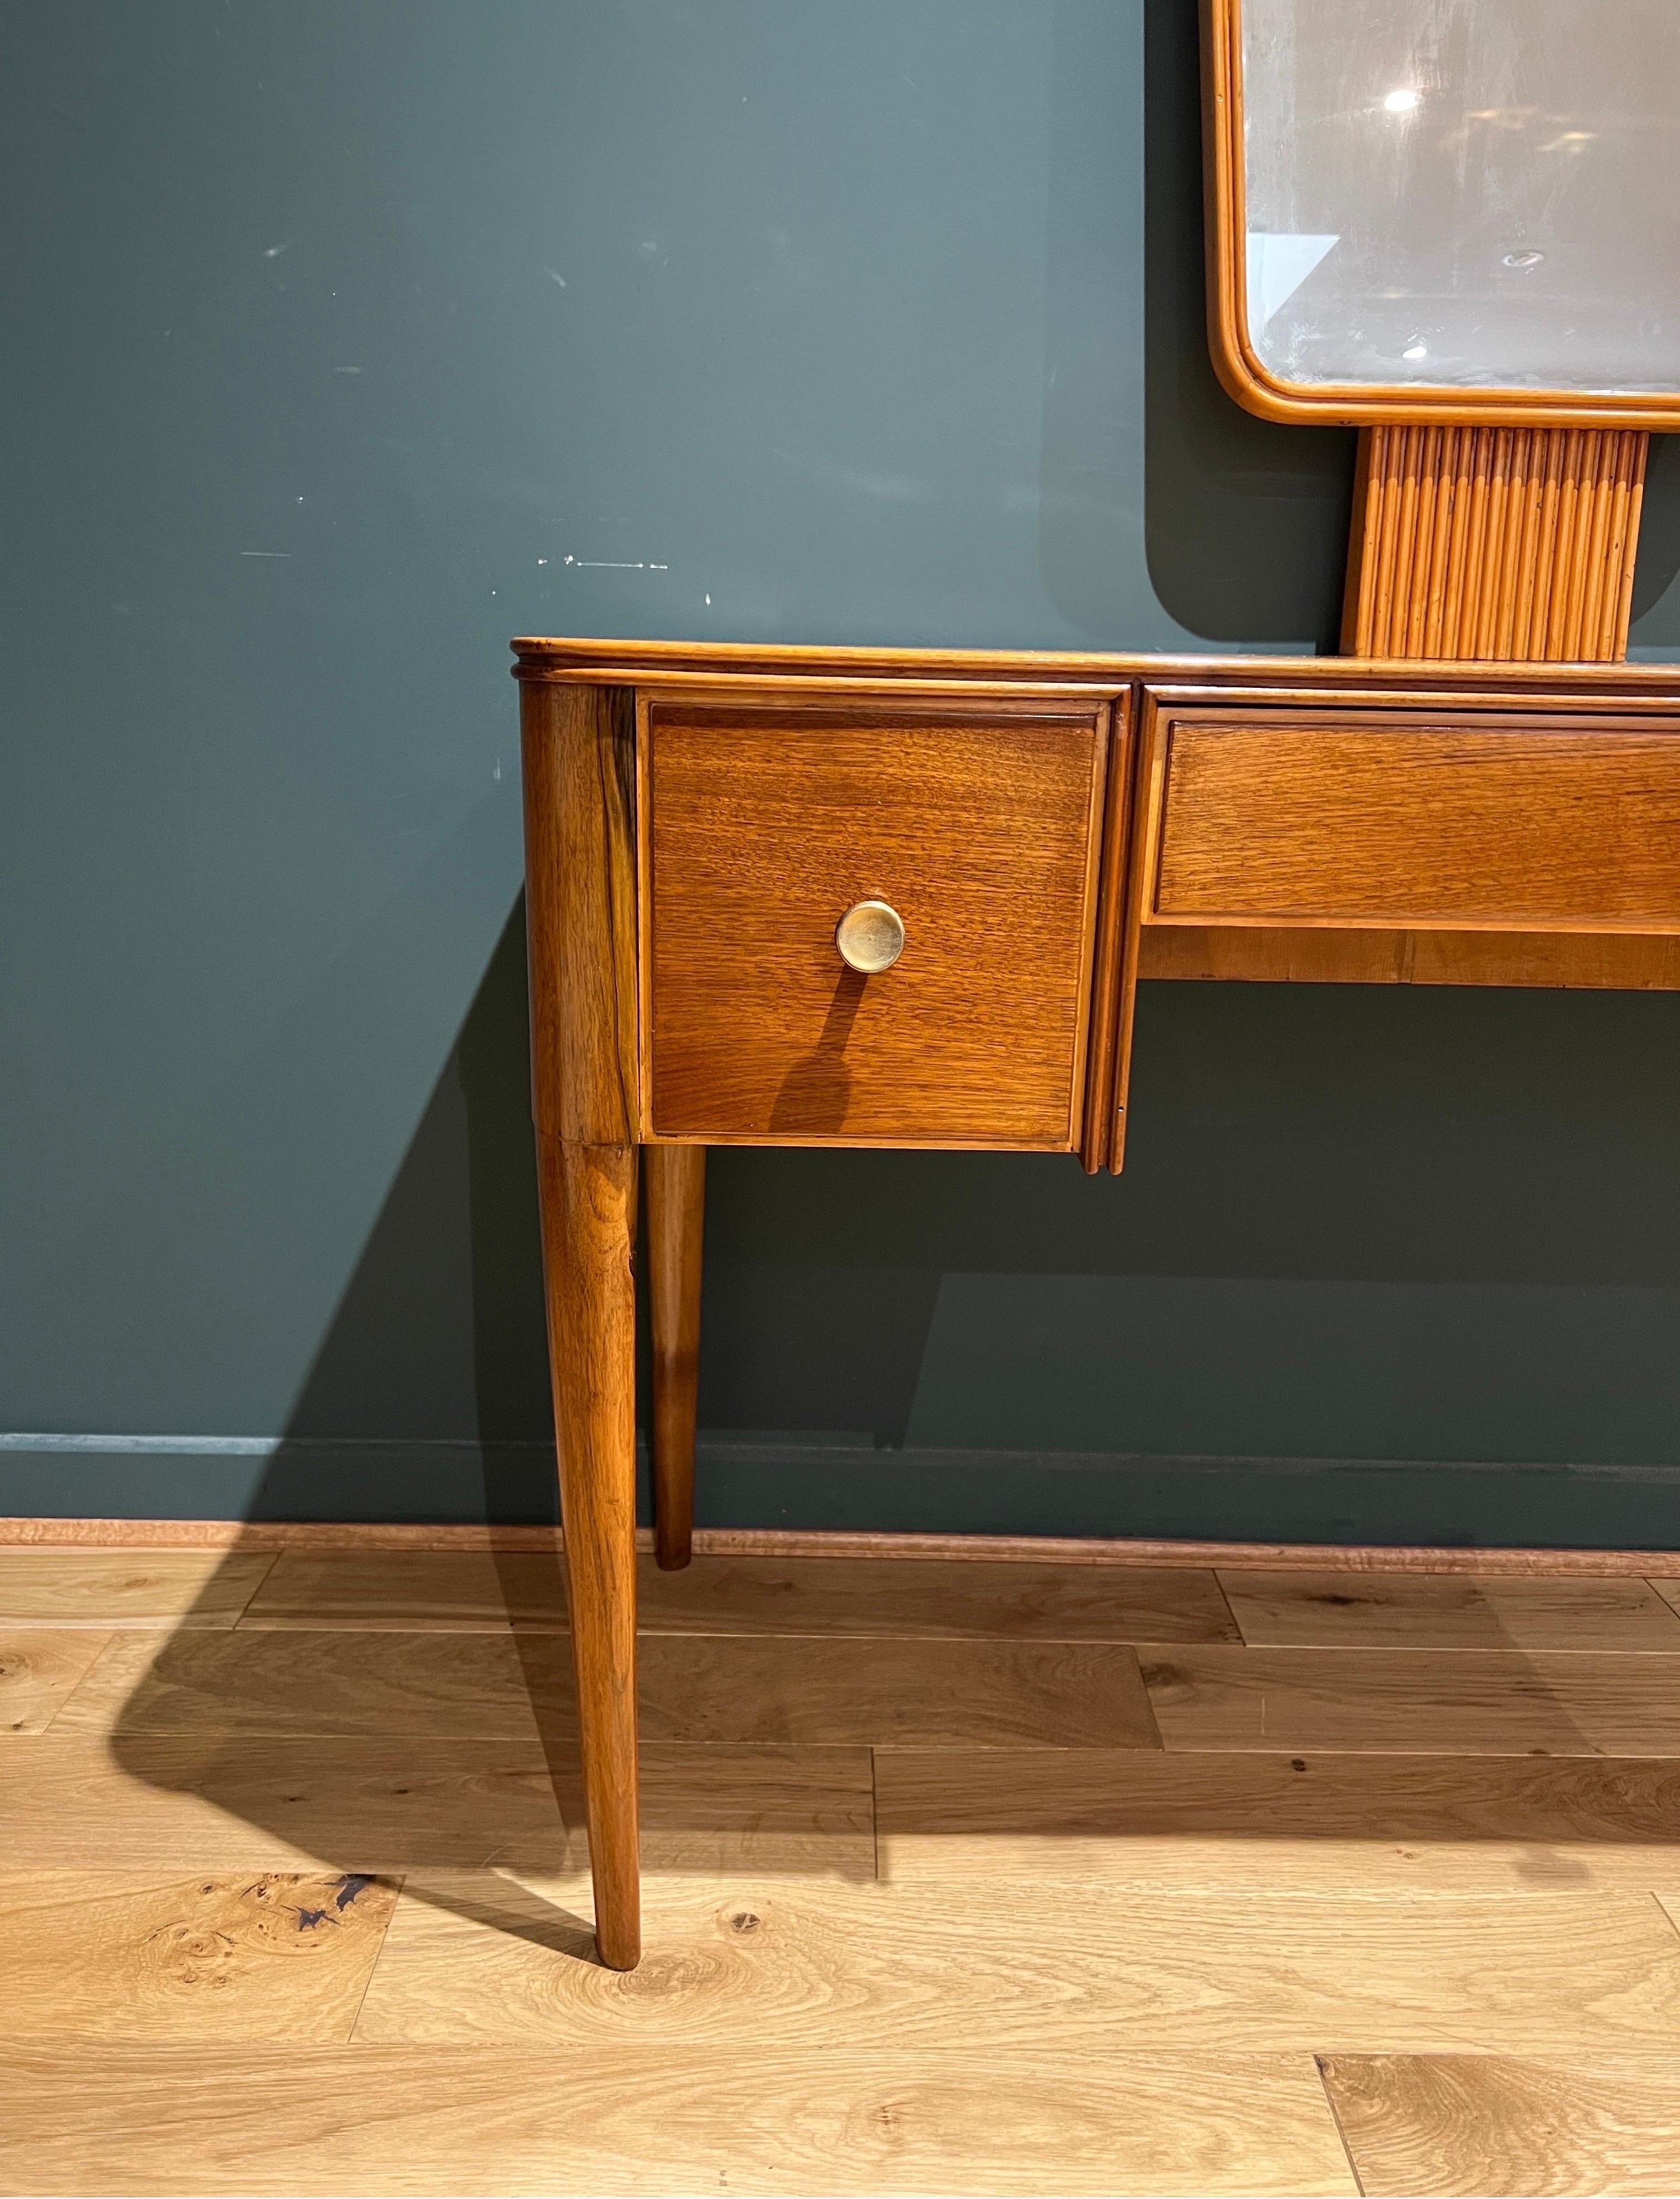 A fine Italian 1950s cherrywood & brass handles dressing table with two flip door drawers and a large framed vanity mirror with reeded wood base centred above a spacious middle drawer. 
Designed by Ulrich. 
The mirror is detachable to reduce